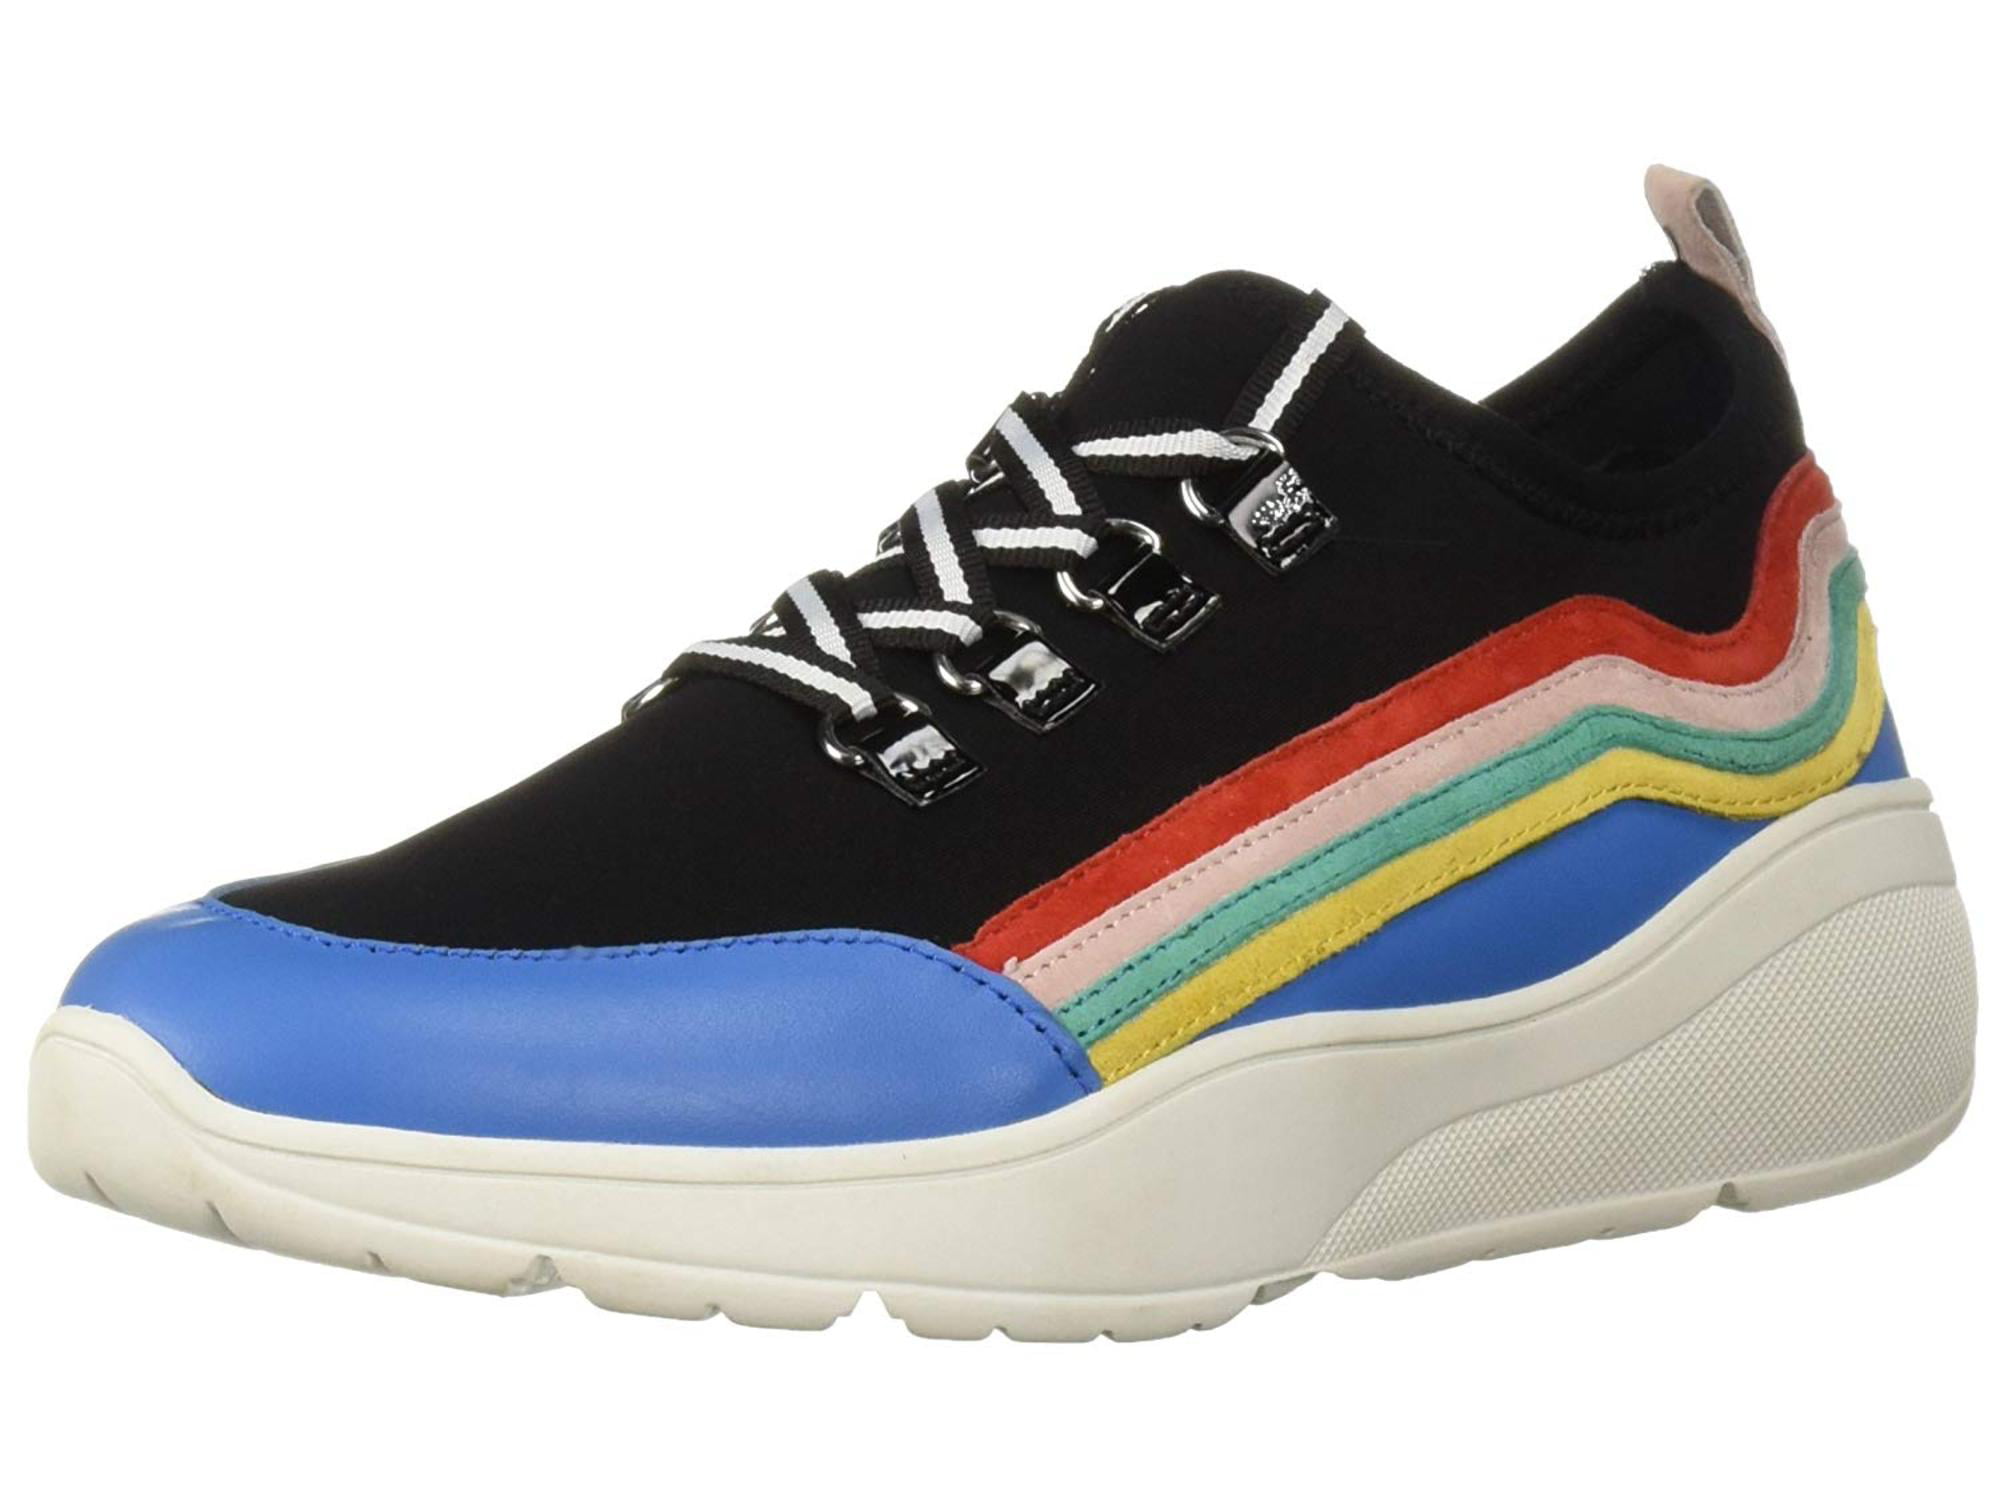 steve madden colorful sneakers